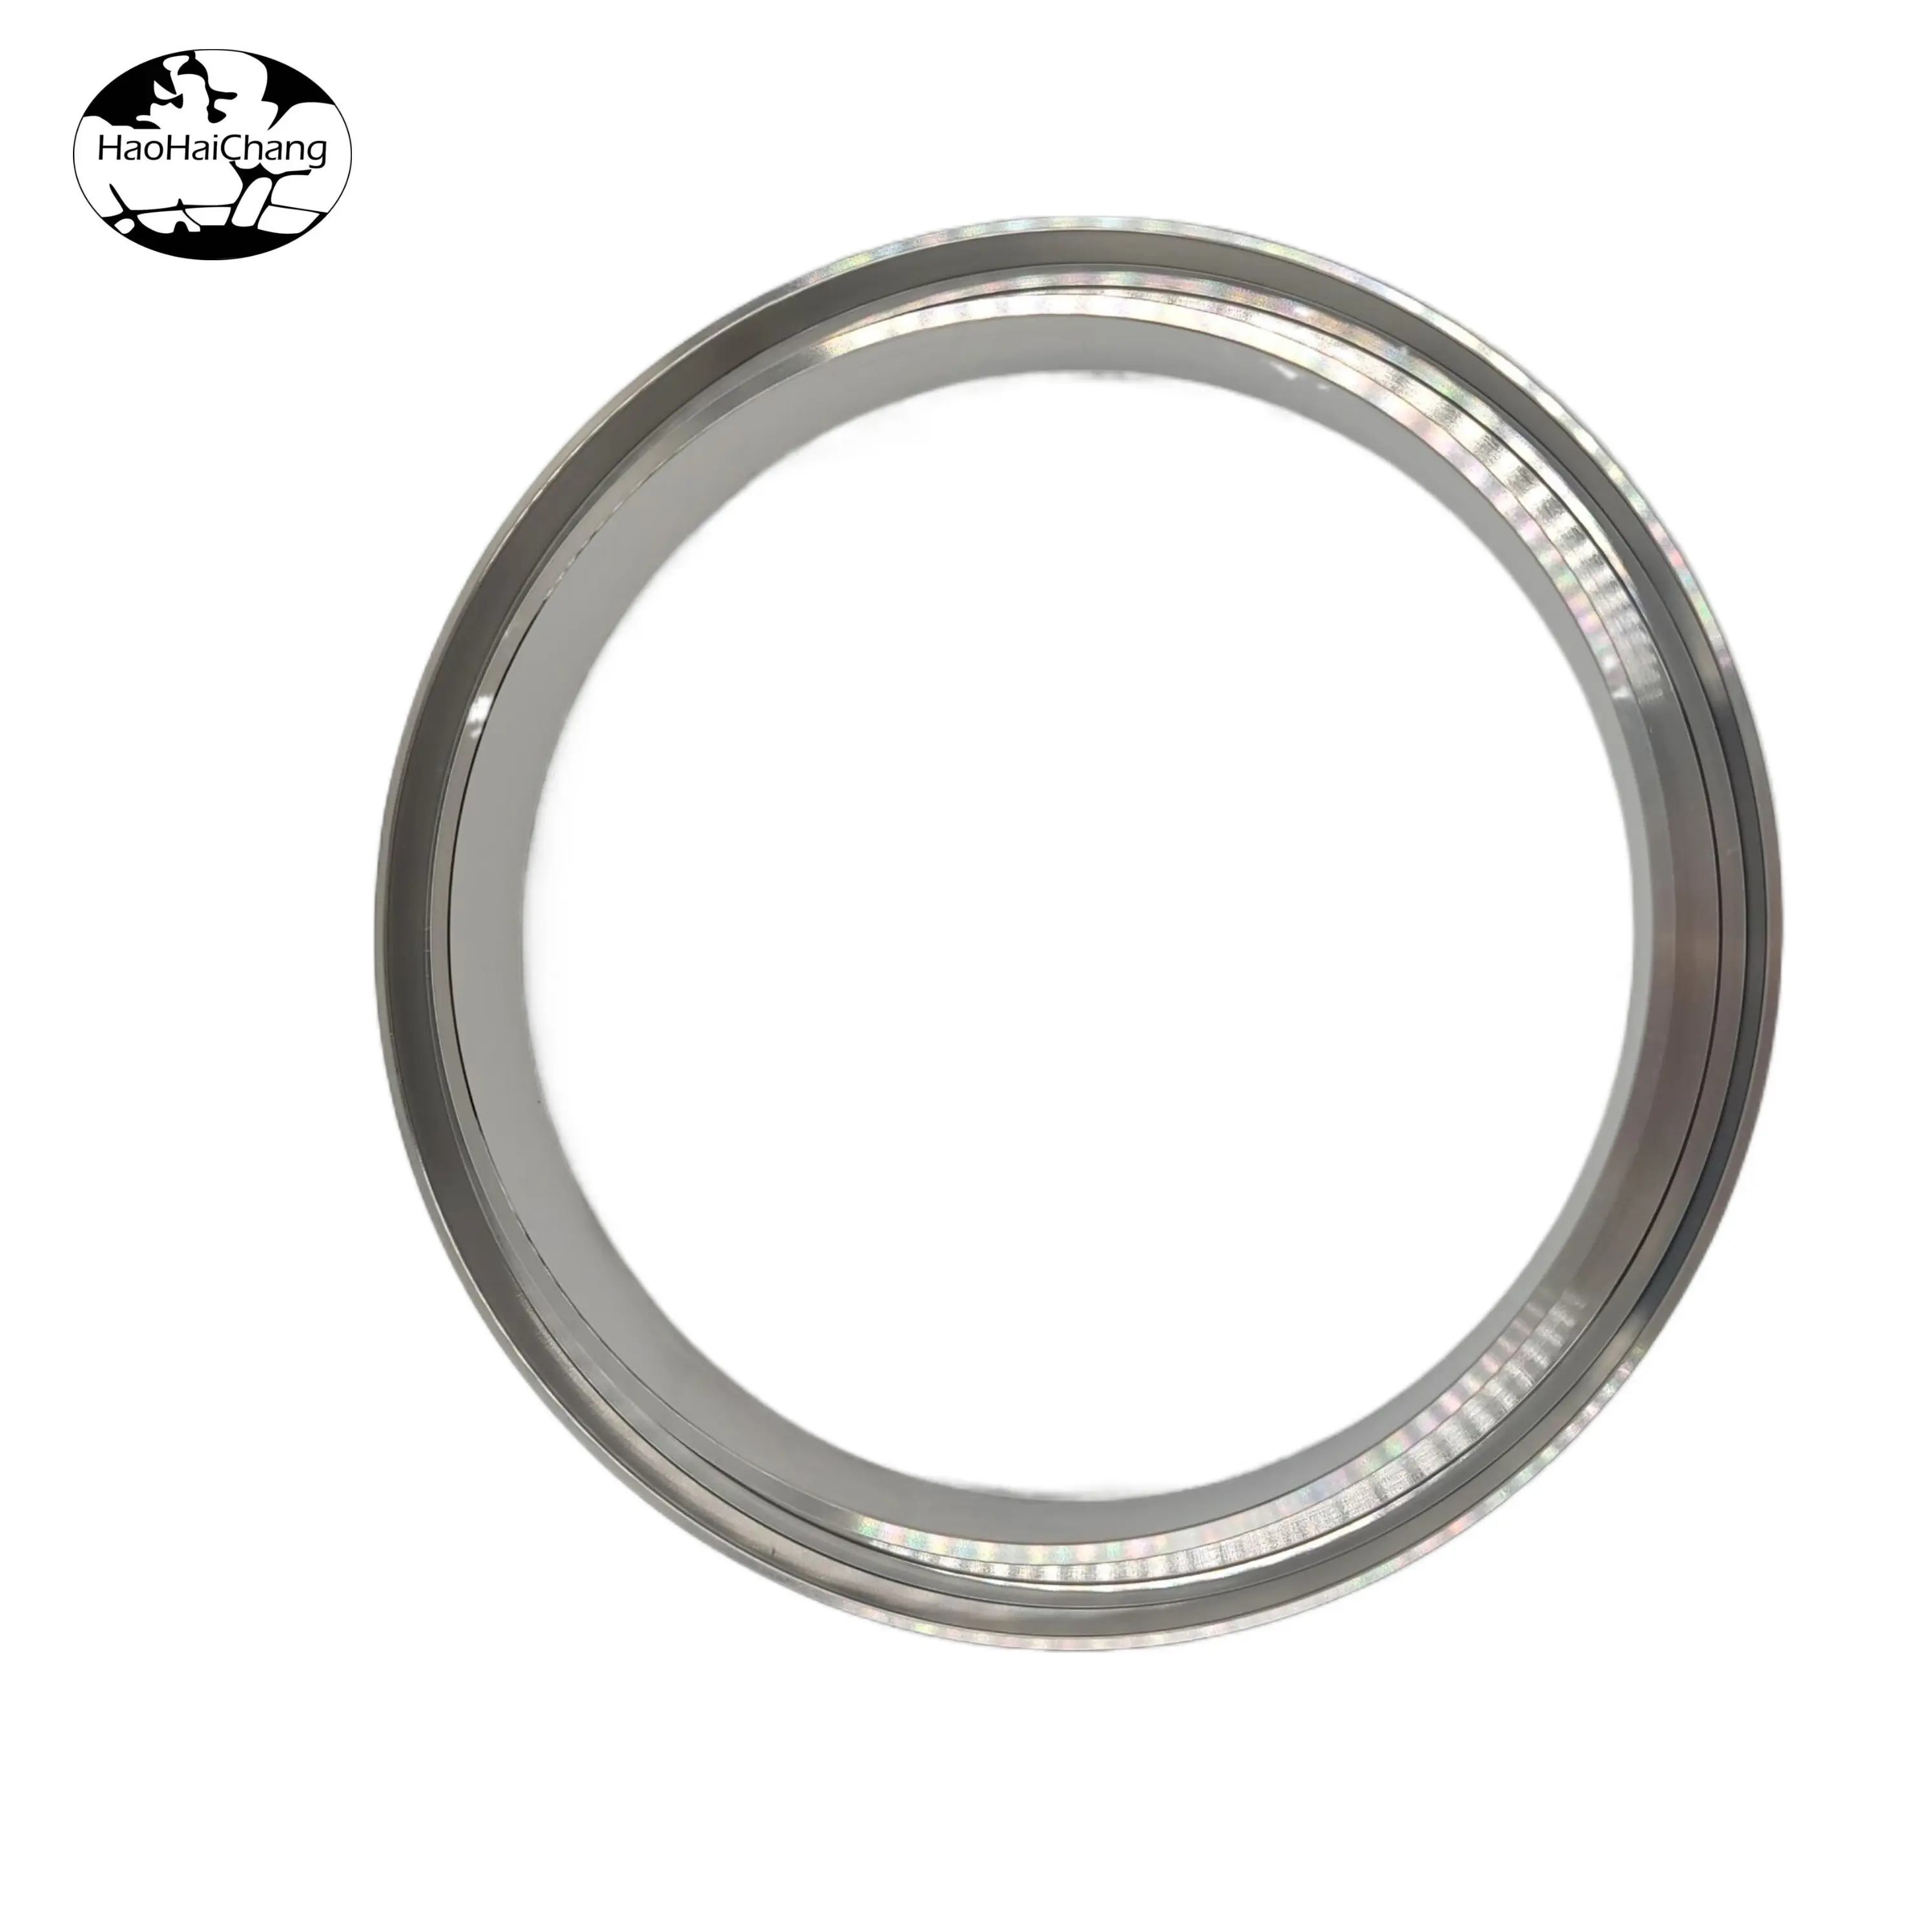 HHC-565 stainless steel flange